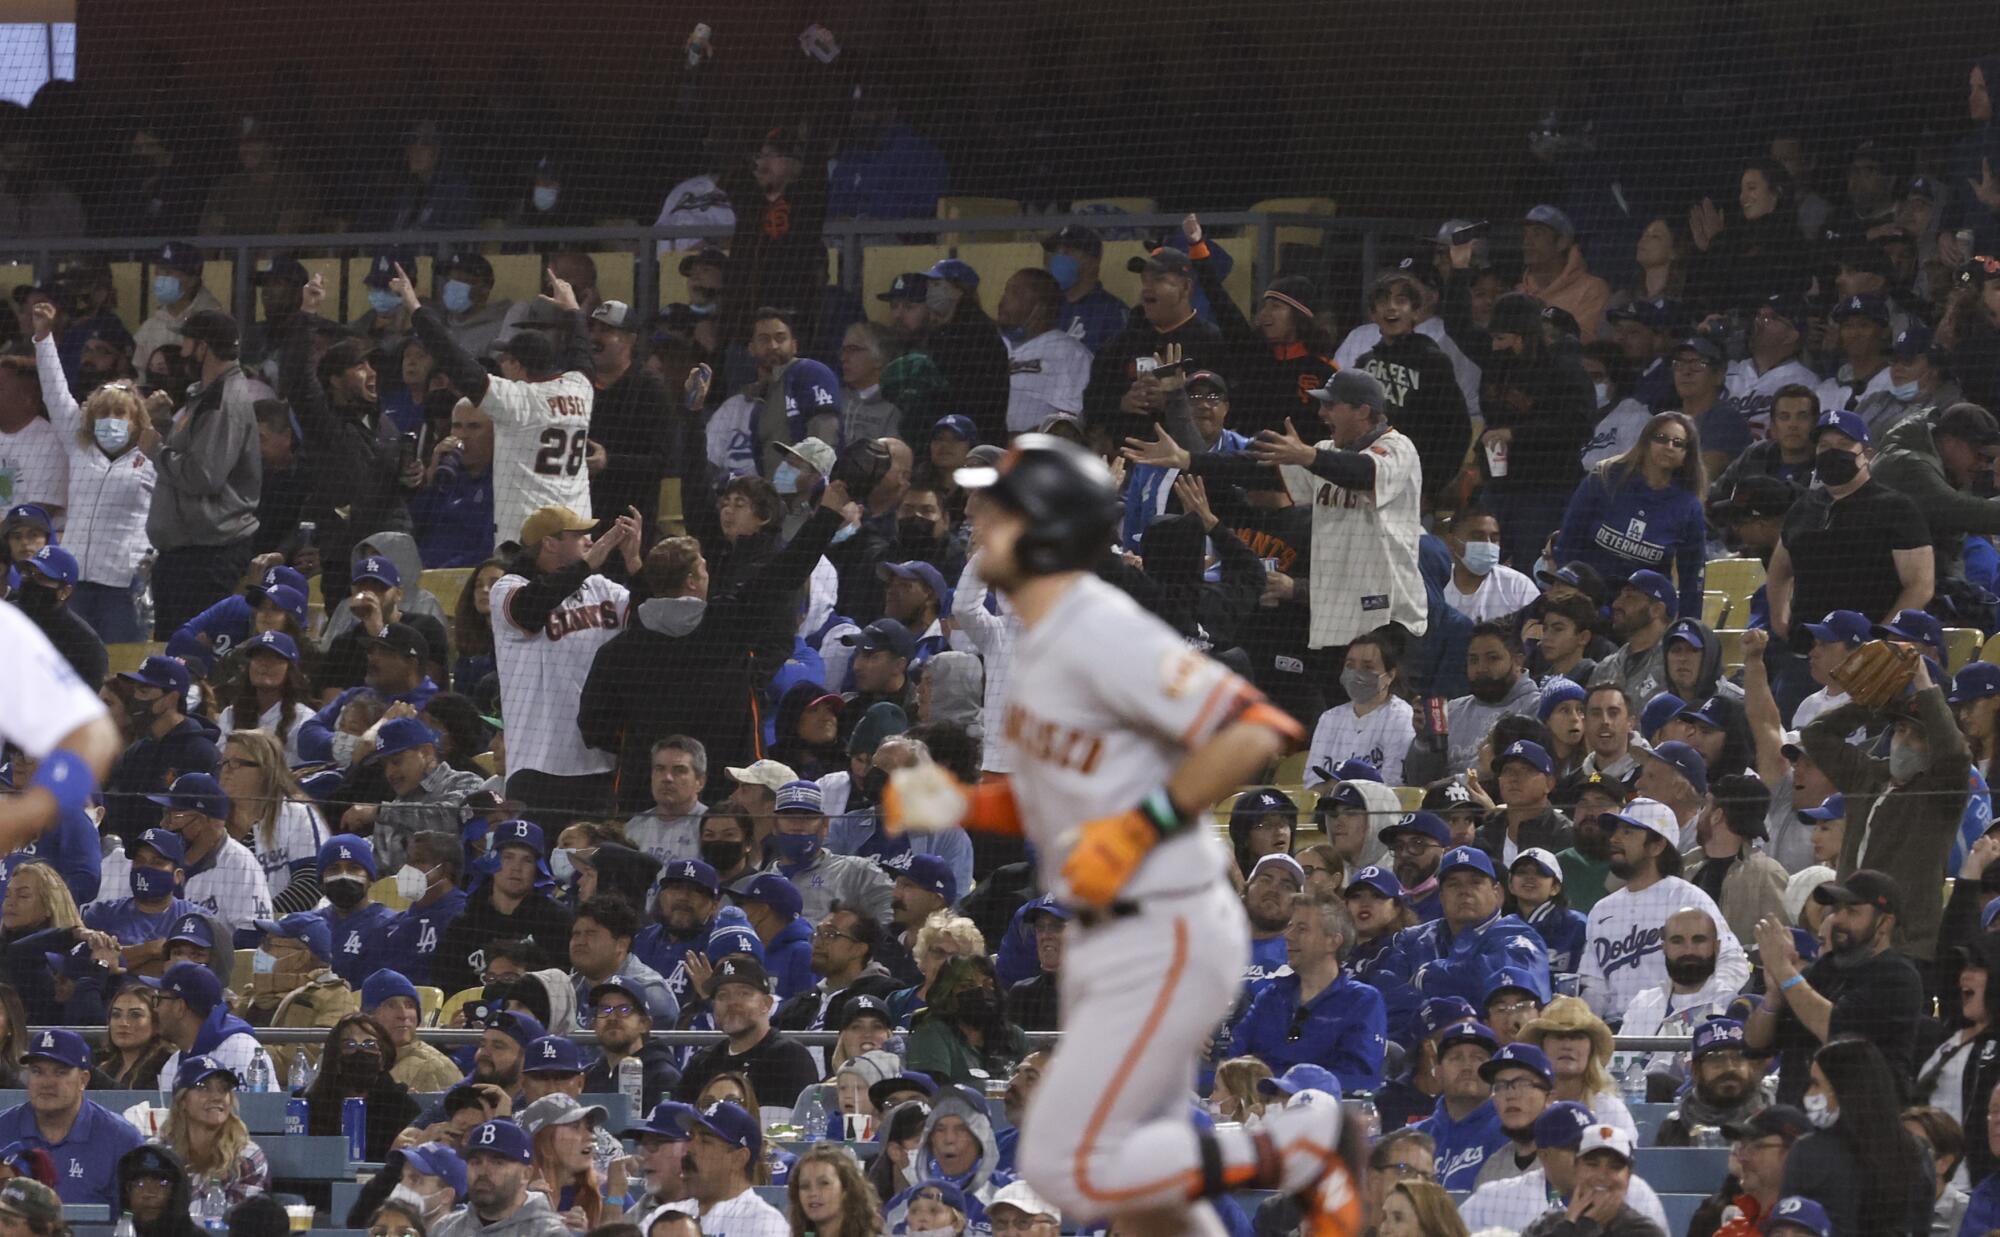 San Francisco Giants fans celebrate after a solo home run by Evan Longoria